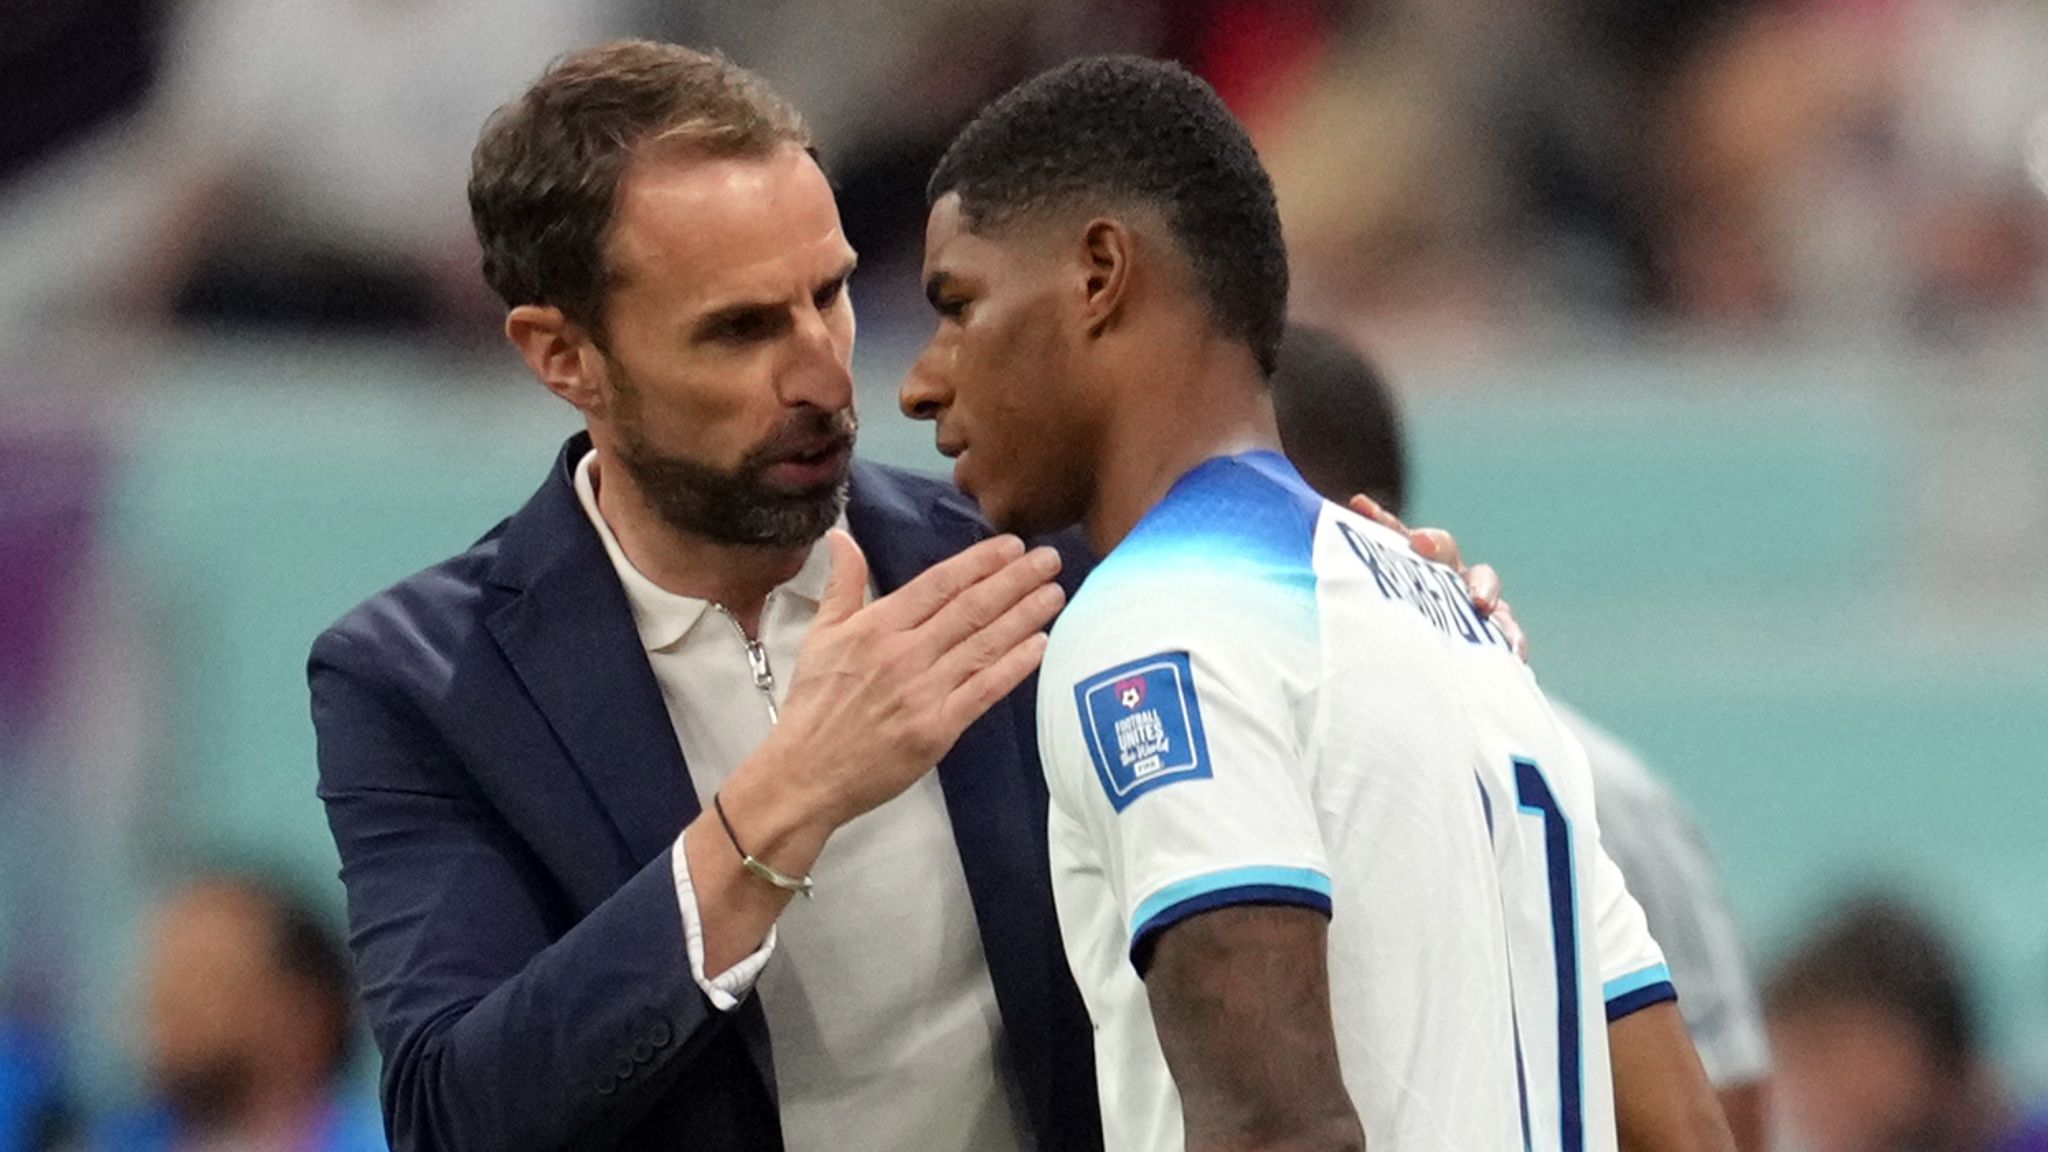 Marcus Rashford says Gareth Southgate has raised training standards at England with greater intensity and dedication | Football News | Sky Sports